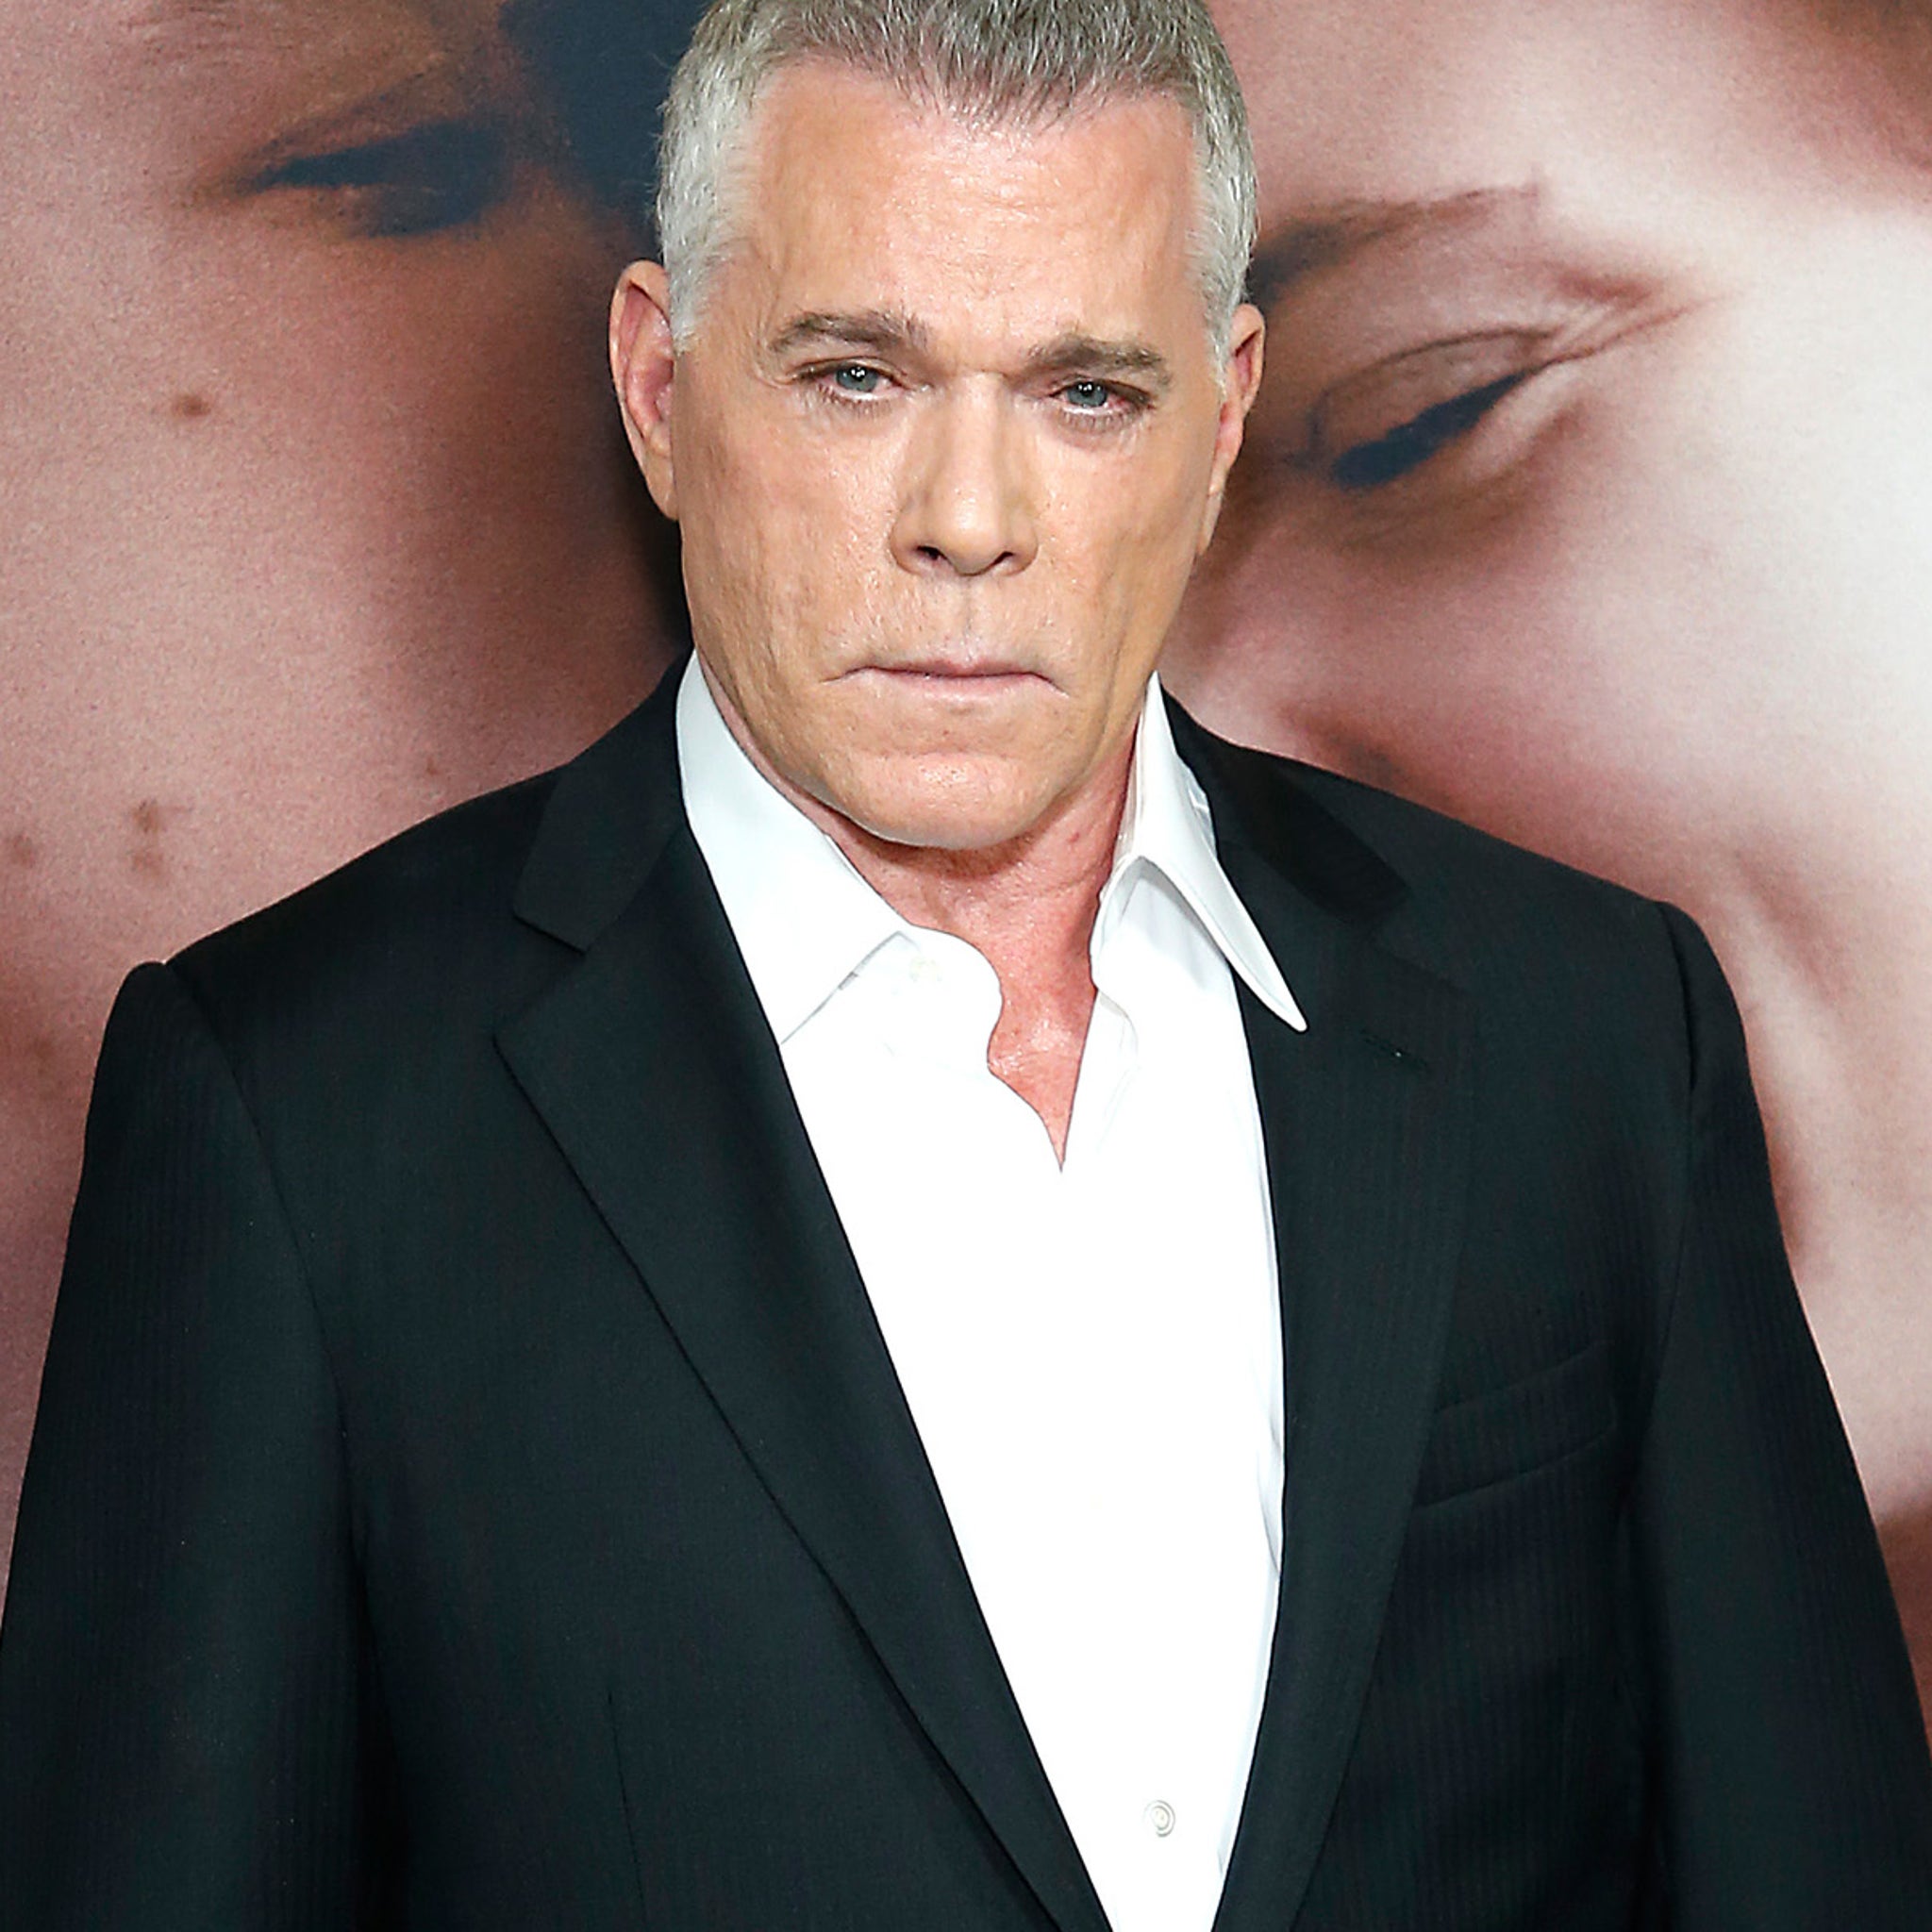 Field of Dreams' Star Kevin Costner Pays Tribute to Ray Liotta in the Most  Emotional Way